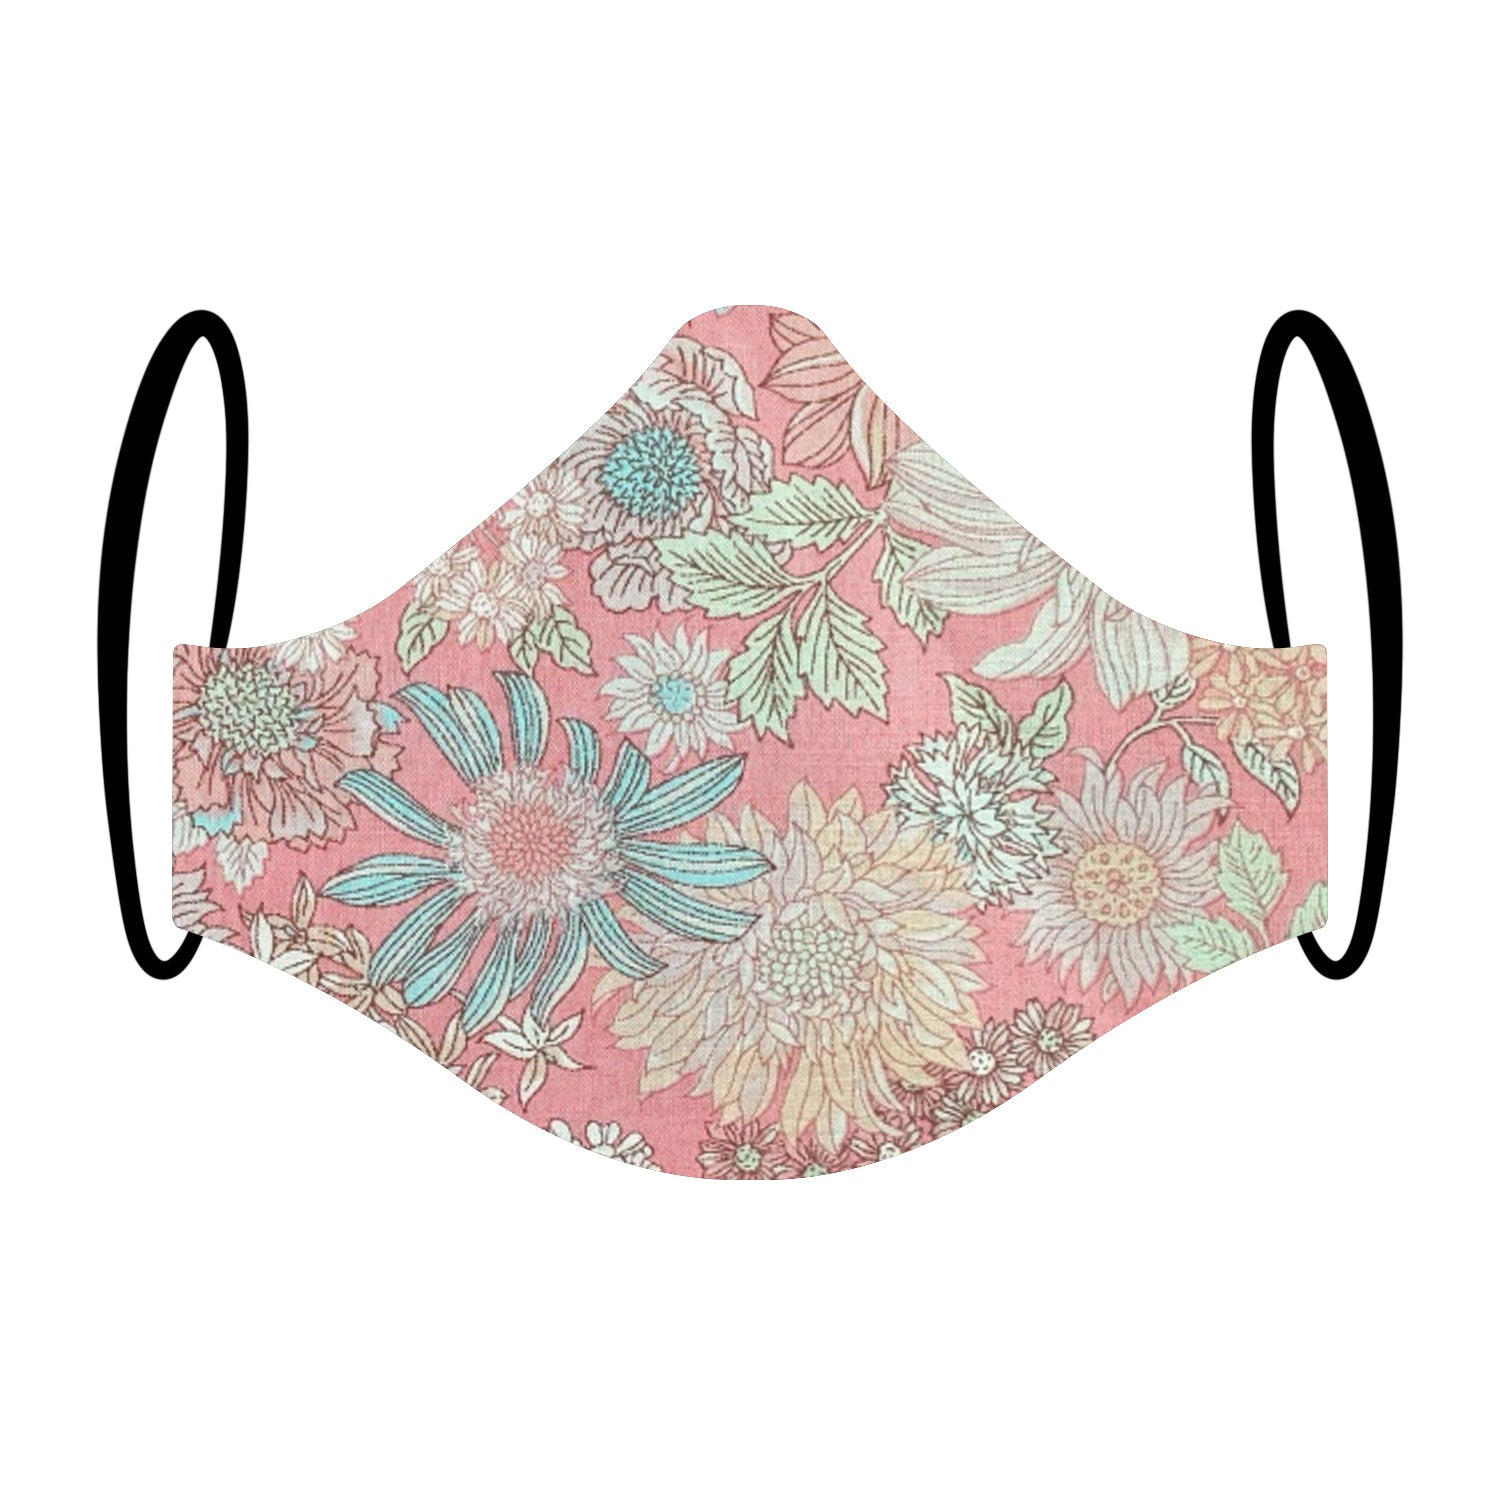 "Perrrty in Pastel" Premium Liberty London Printed Fabric Triple-layer Washable Face Mask